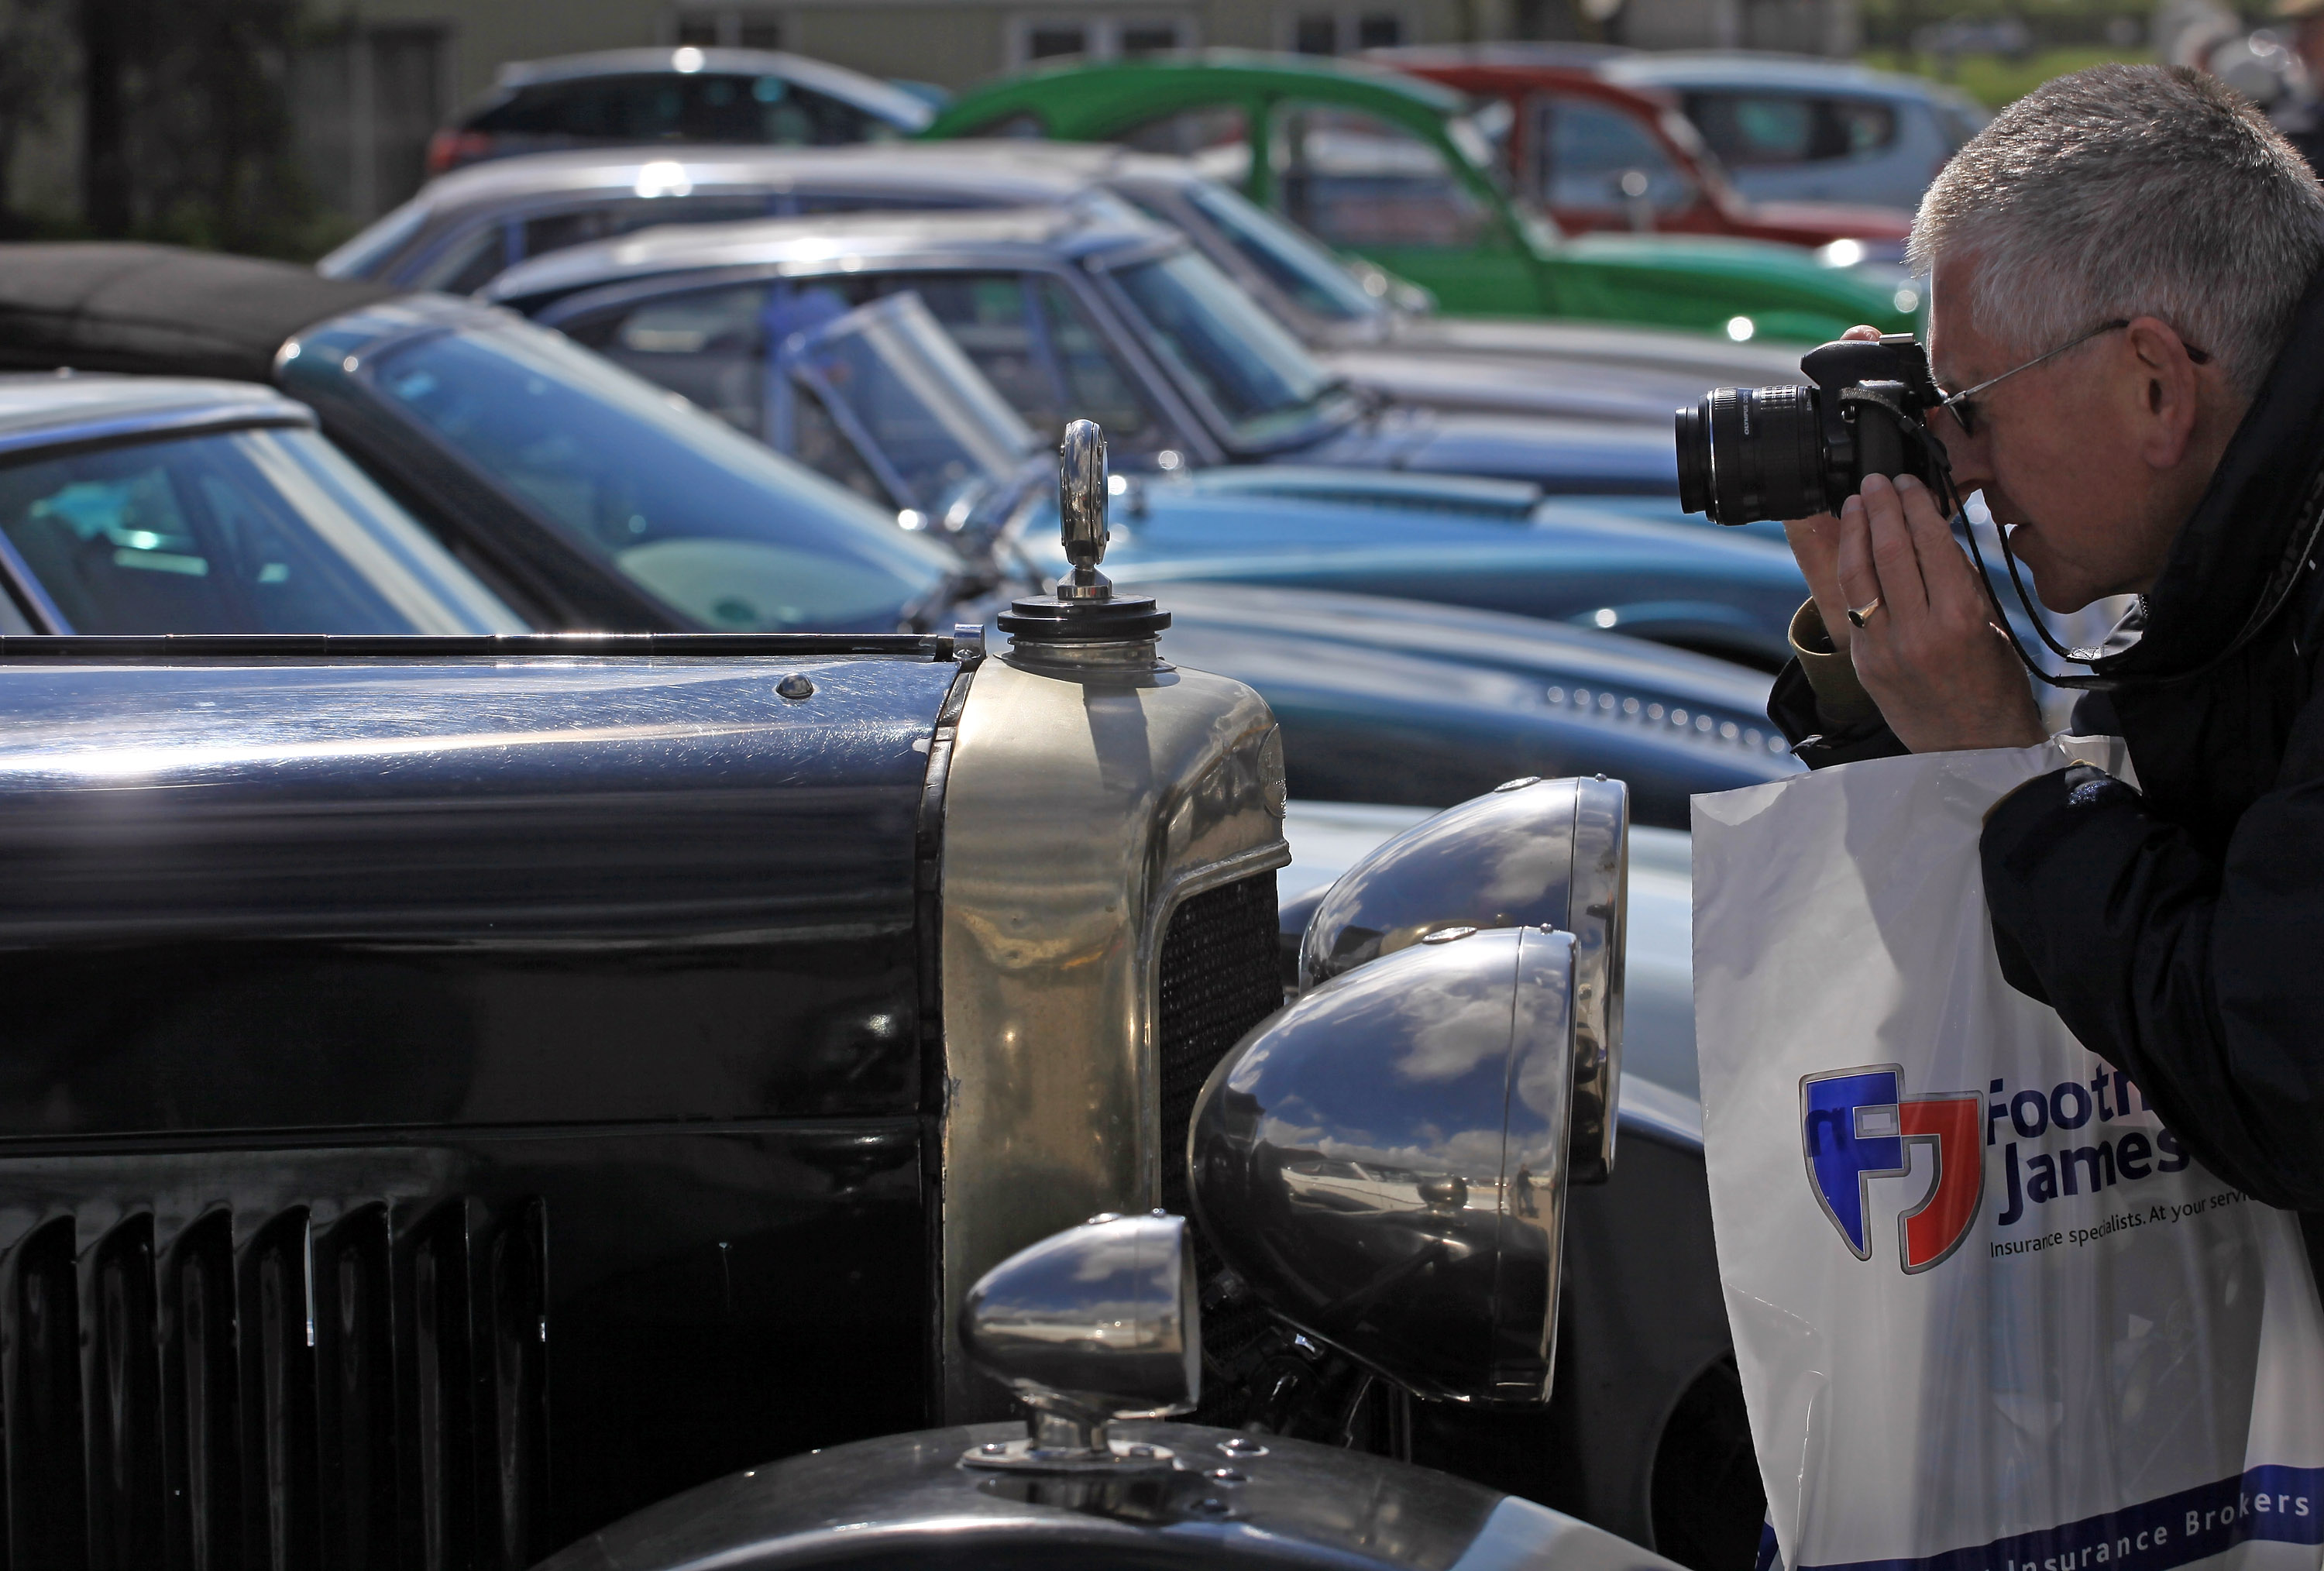 A visitor to the Footman James Bristol Classic Car Show stops to take a photograph. (Photo by Matt Cardy/Getty Images)